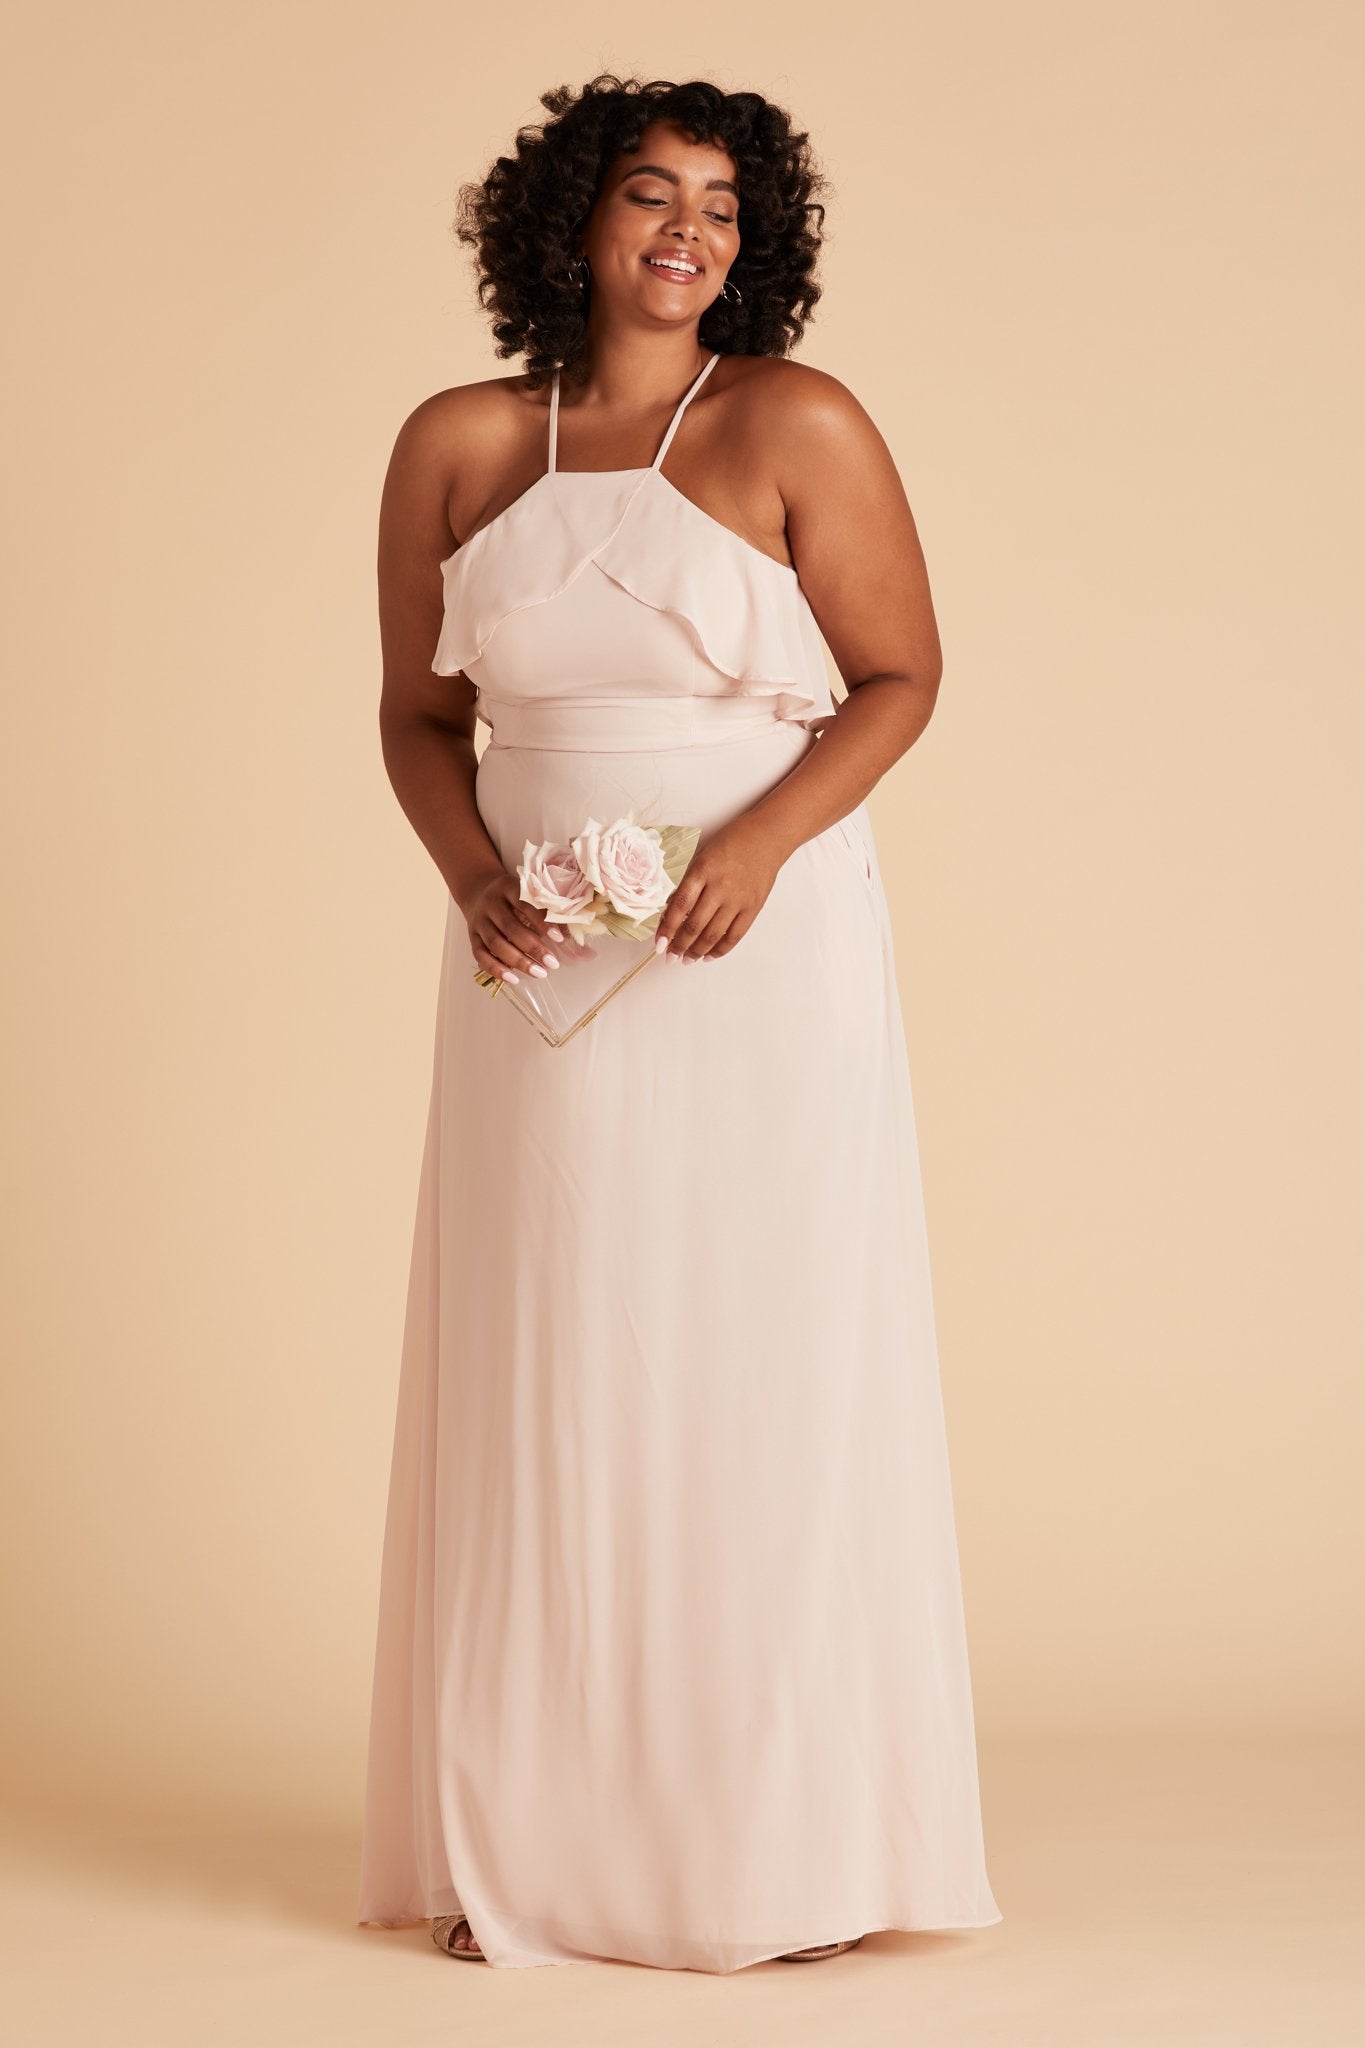 Jules plus size bridesmaid dress in pale blush chiffon by Birdy Grey, front view